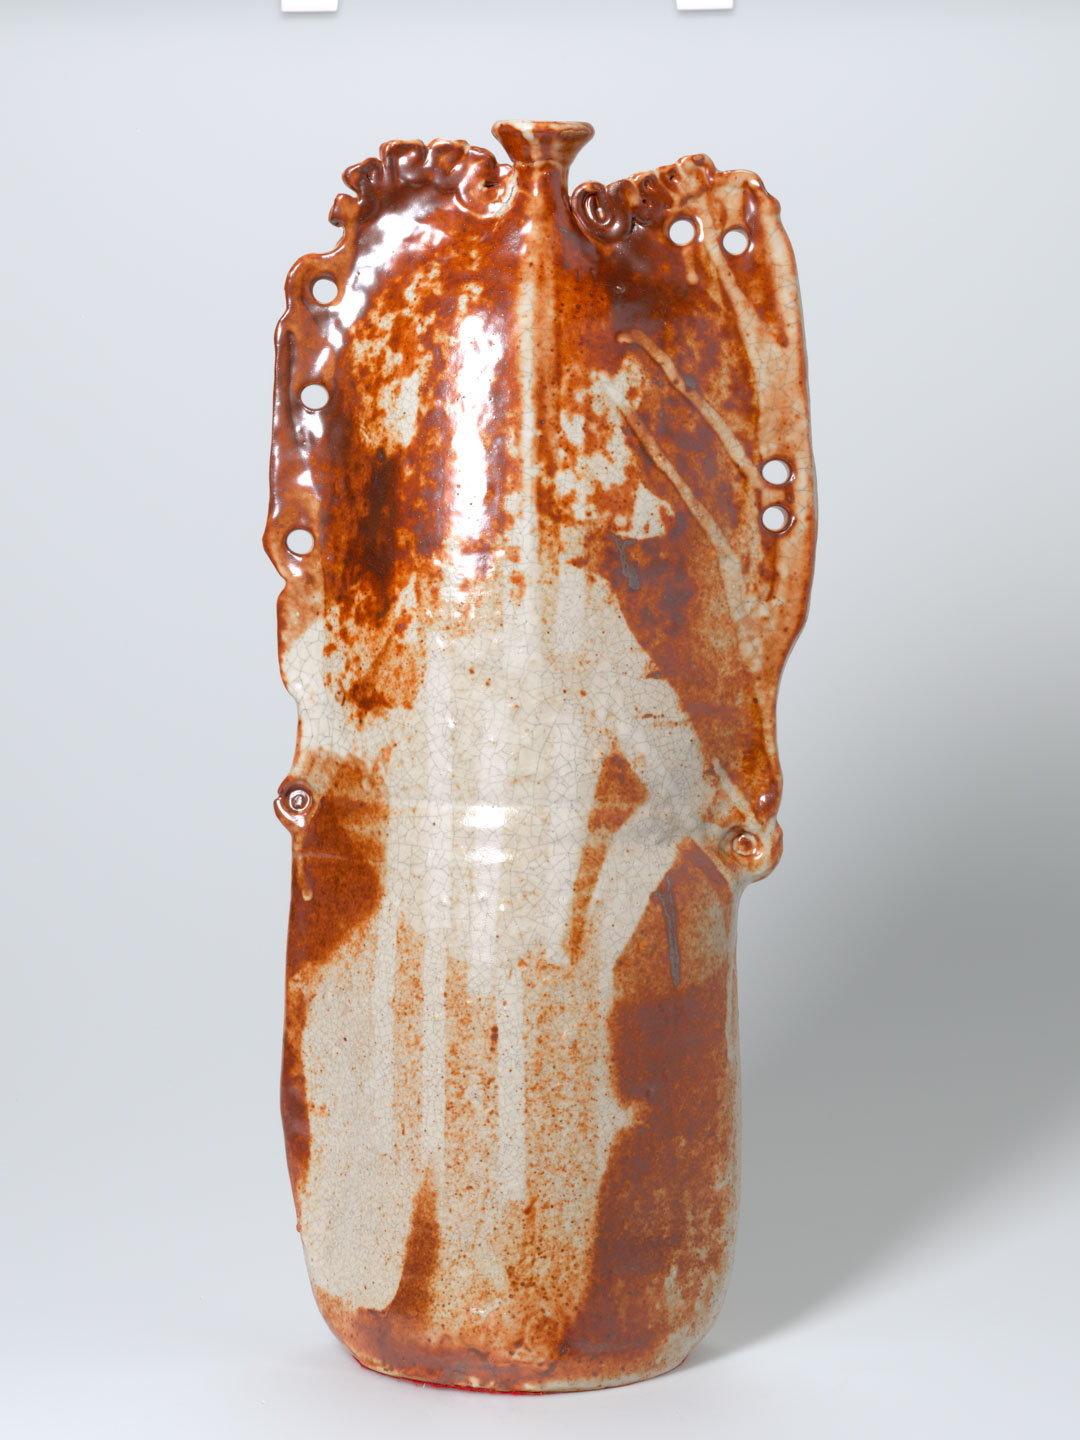 Artwork Vase:  Dance this artwork made of Stoneware, thrown and slab built with stencil decoration and Shino glaze.  Fired to 1300 degrees Celsius